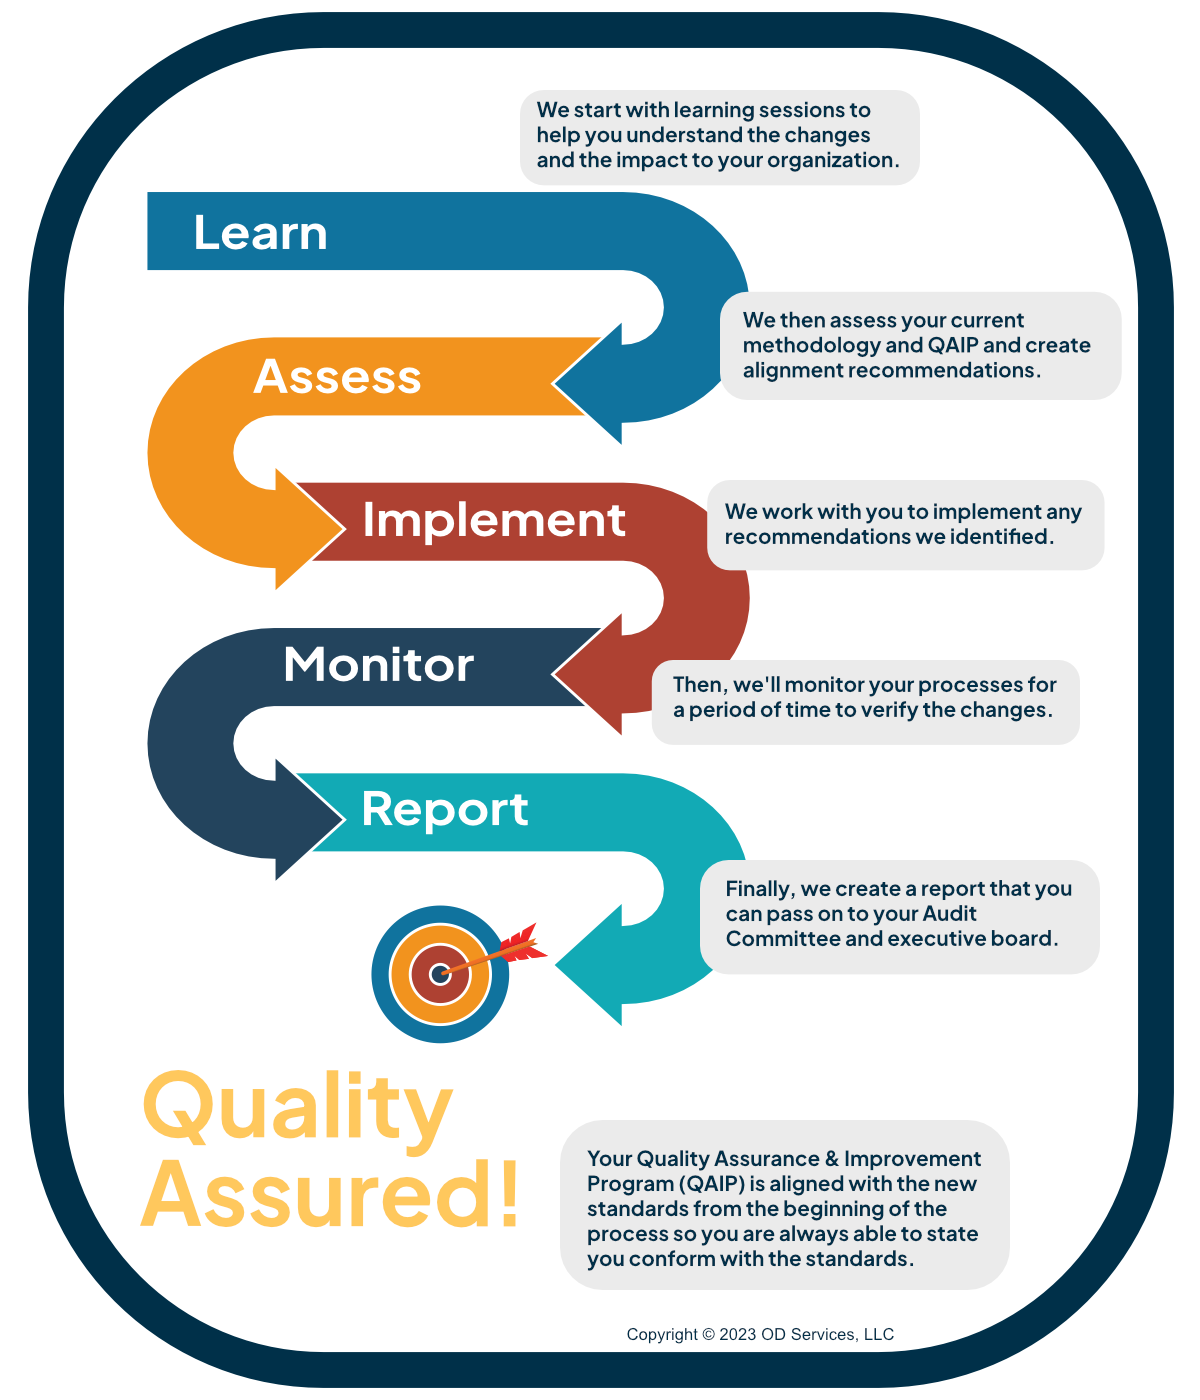 infographic showing the process for migrating internal audit departments to the Global Internal Audit Standards